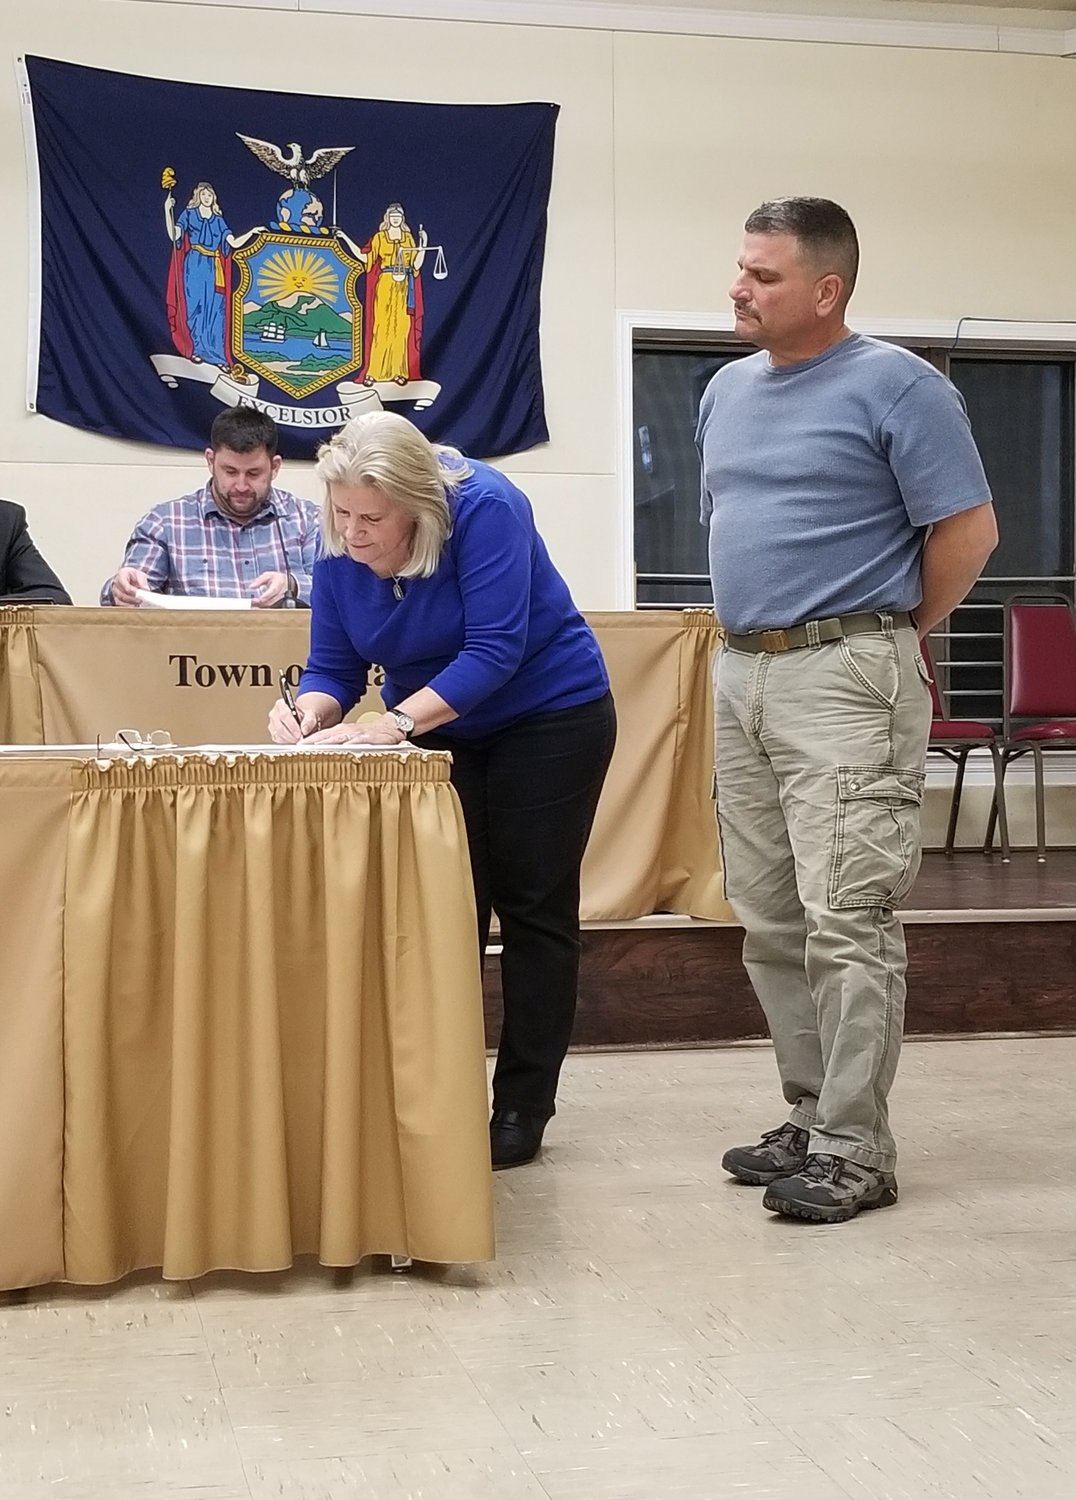 Town Supervisor Janet Lybolt signs the collective bargaining agreement followed by John Stasko, a highway department employee.